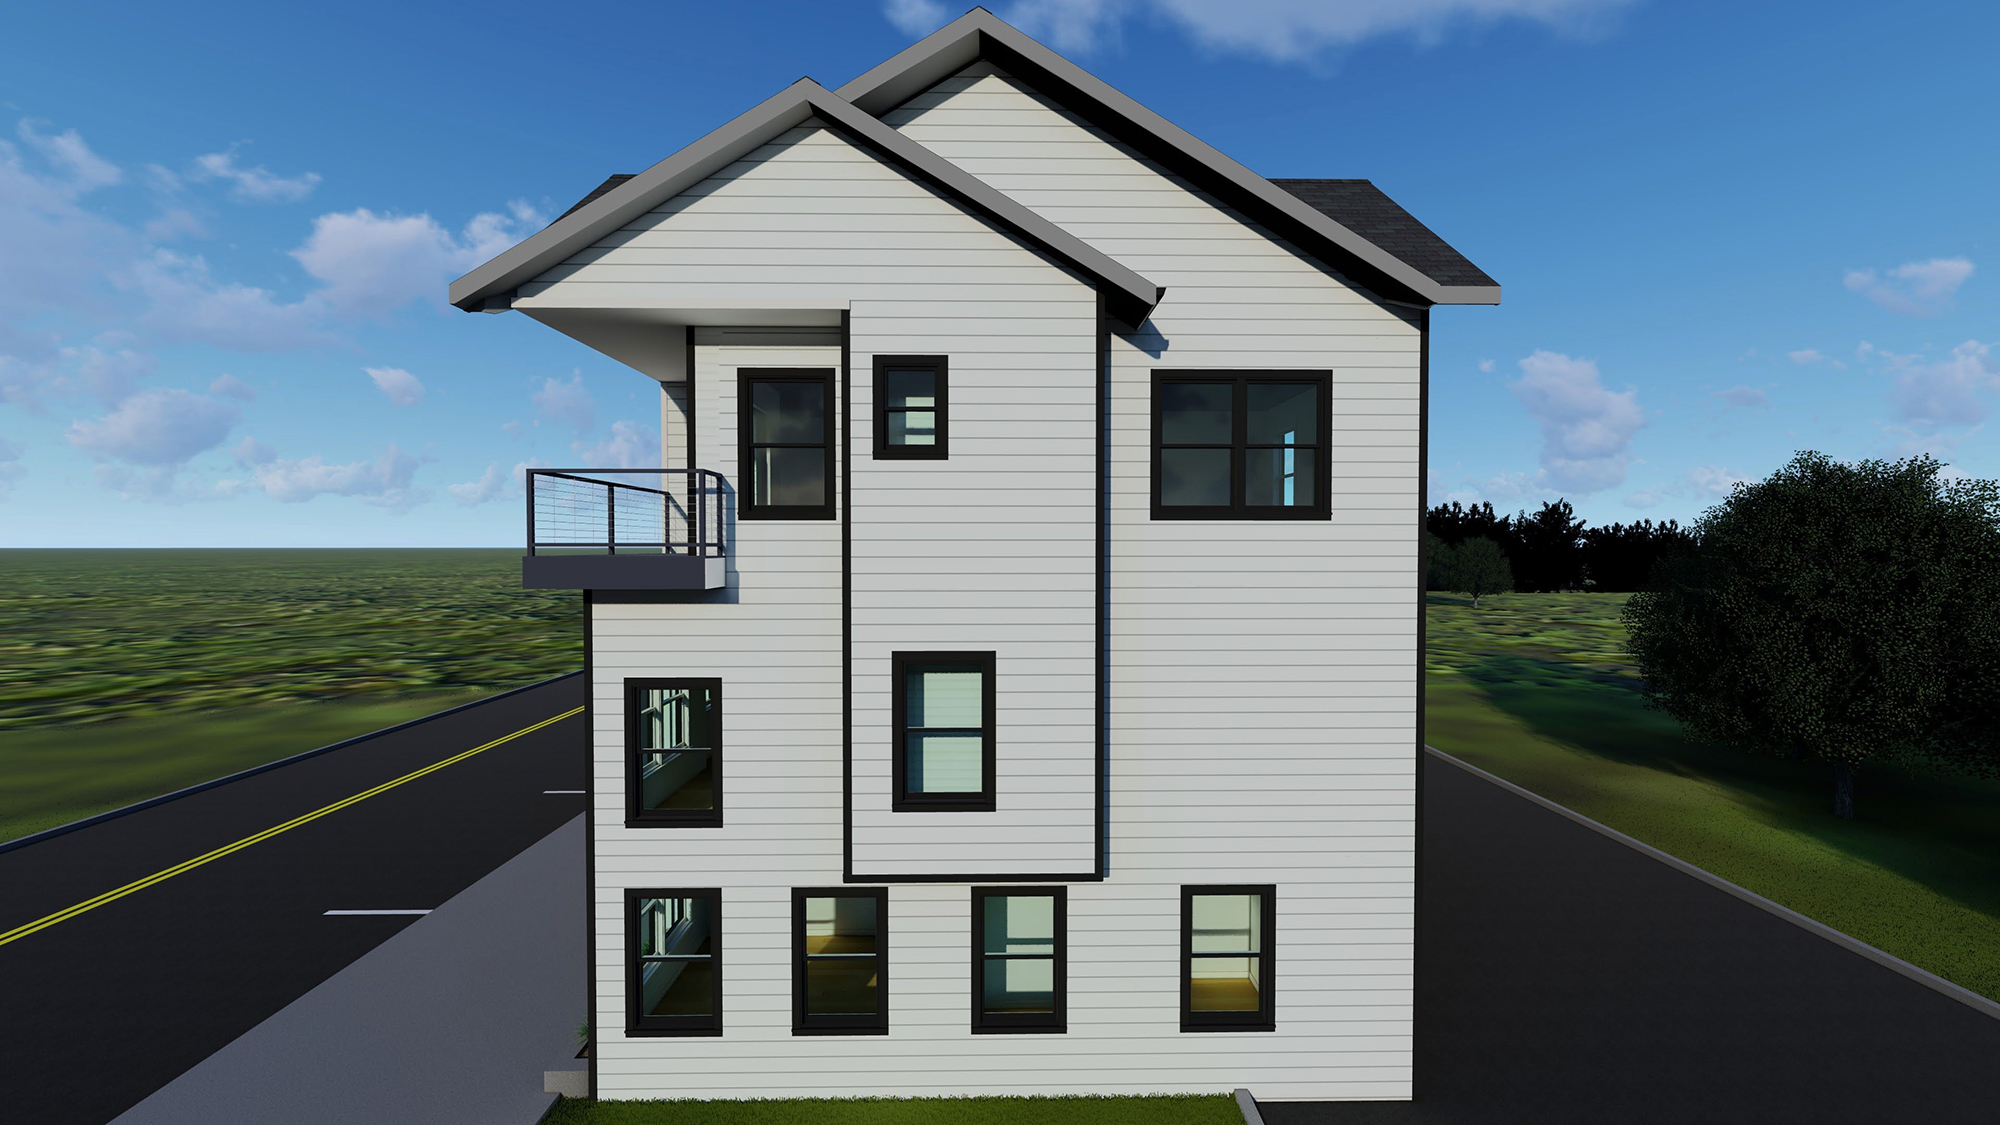 The town house proposal includes attached one-car garages, some with balconies.